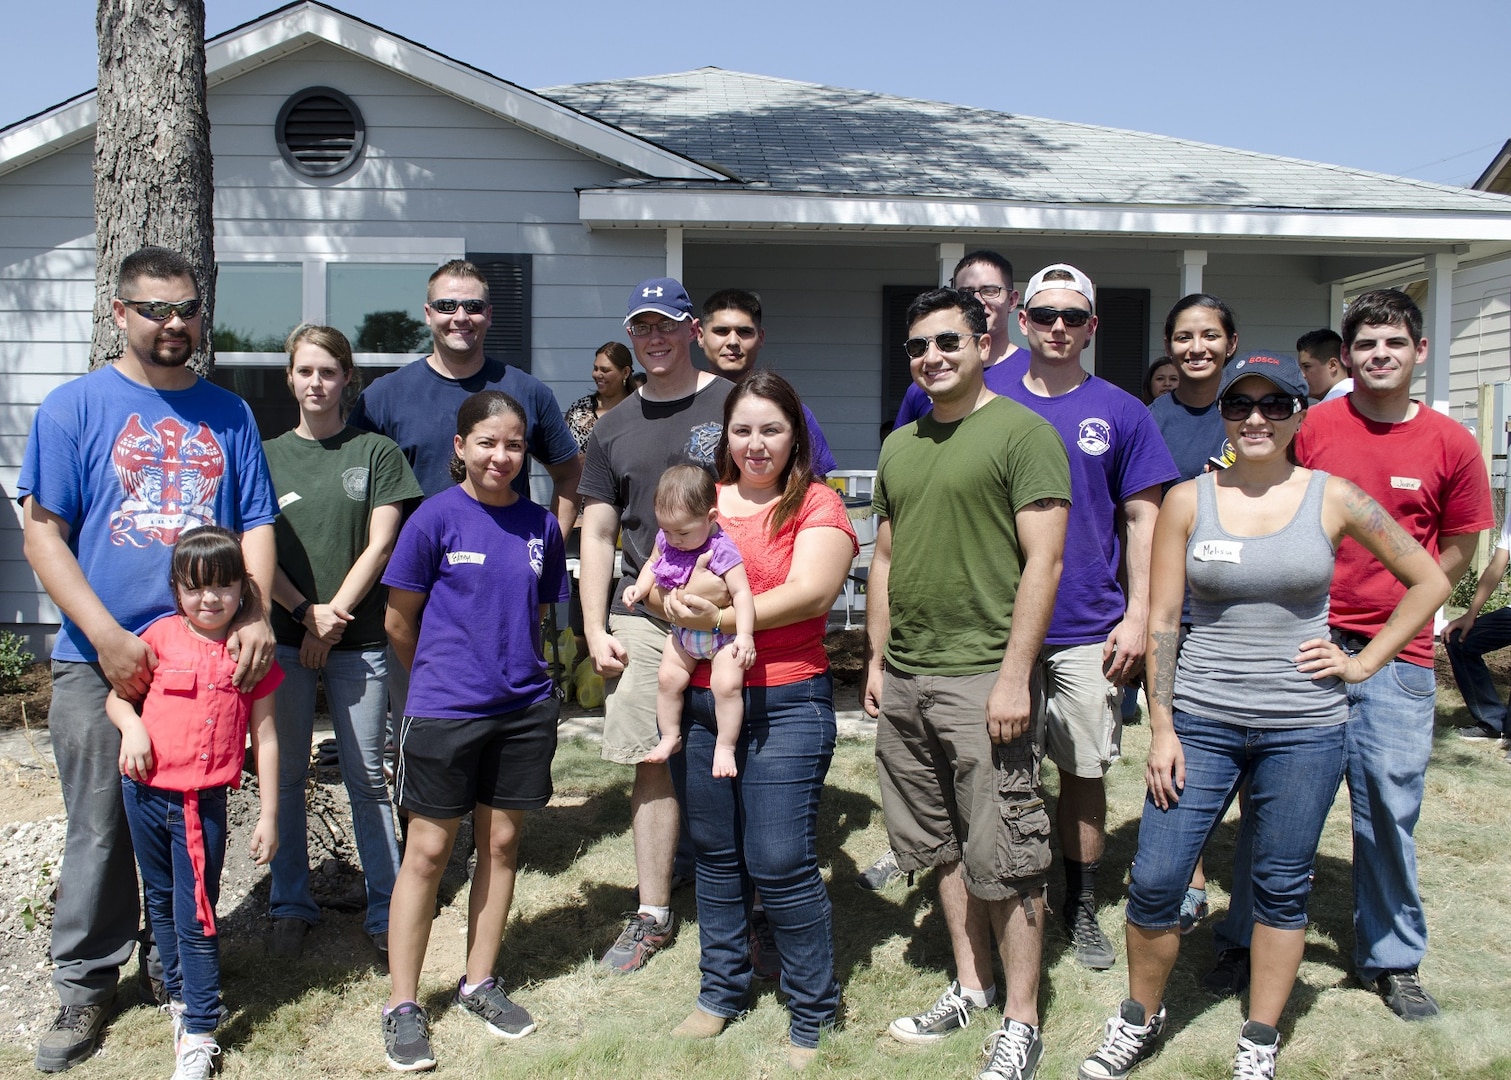 The Gonzalez family, recipients of a new home from Habitat for Humanity, stand with Air Force volunteers who helped make their home a reality in San Antonio, Texas, Aug. 22.